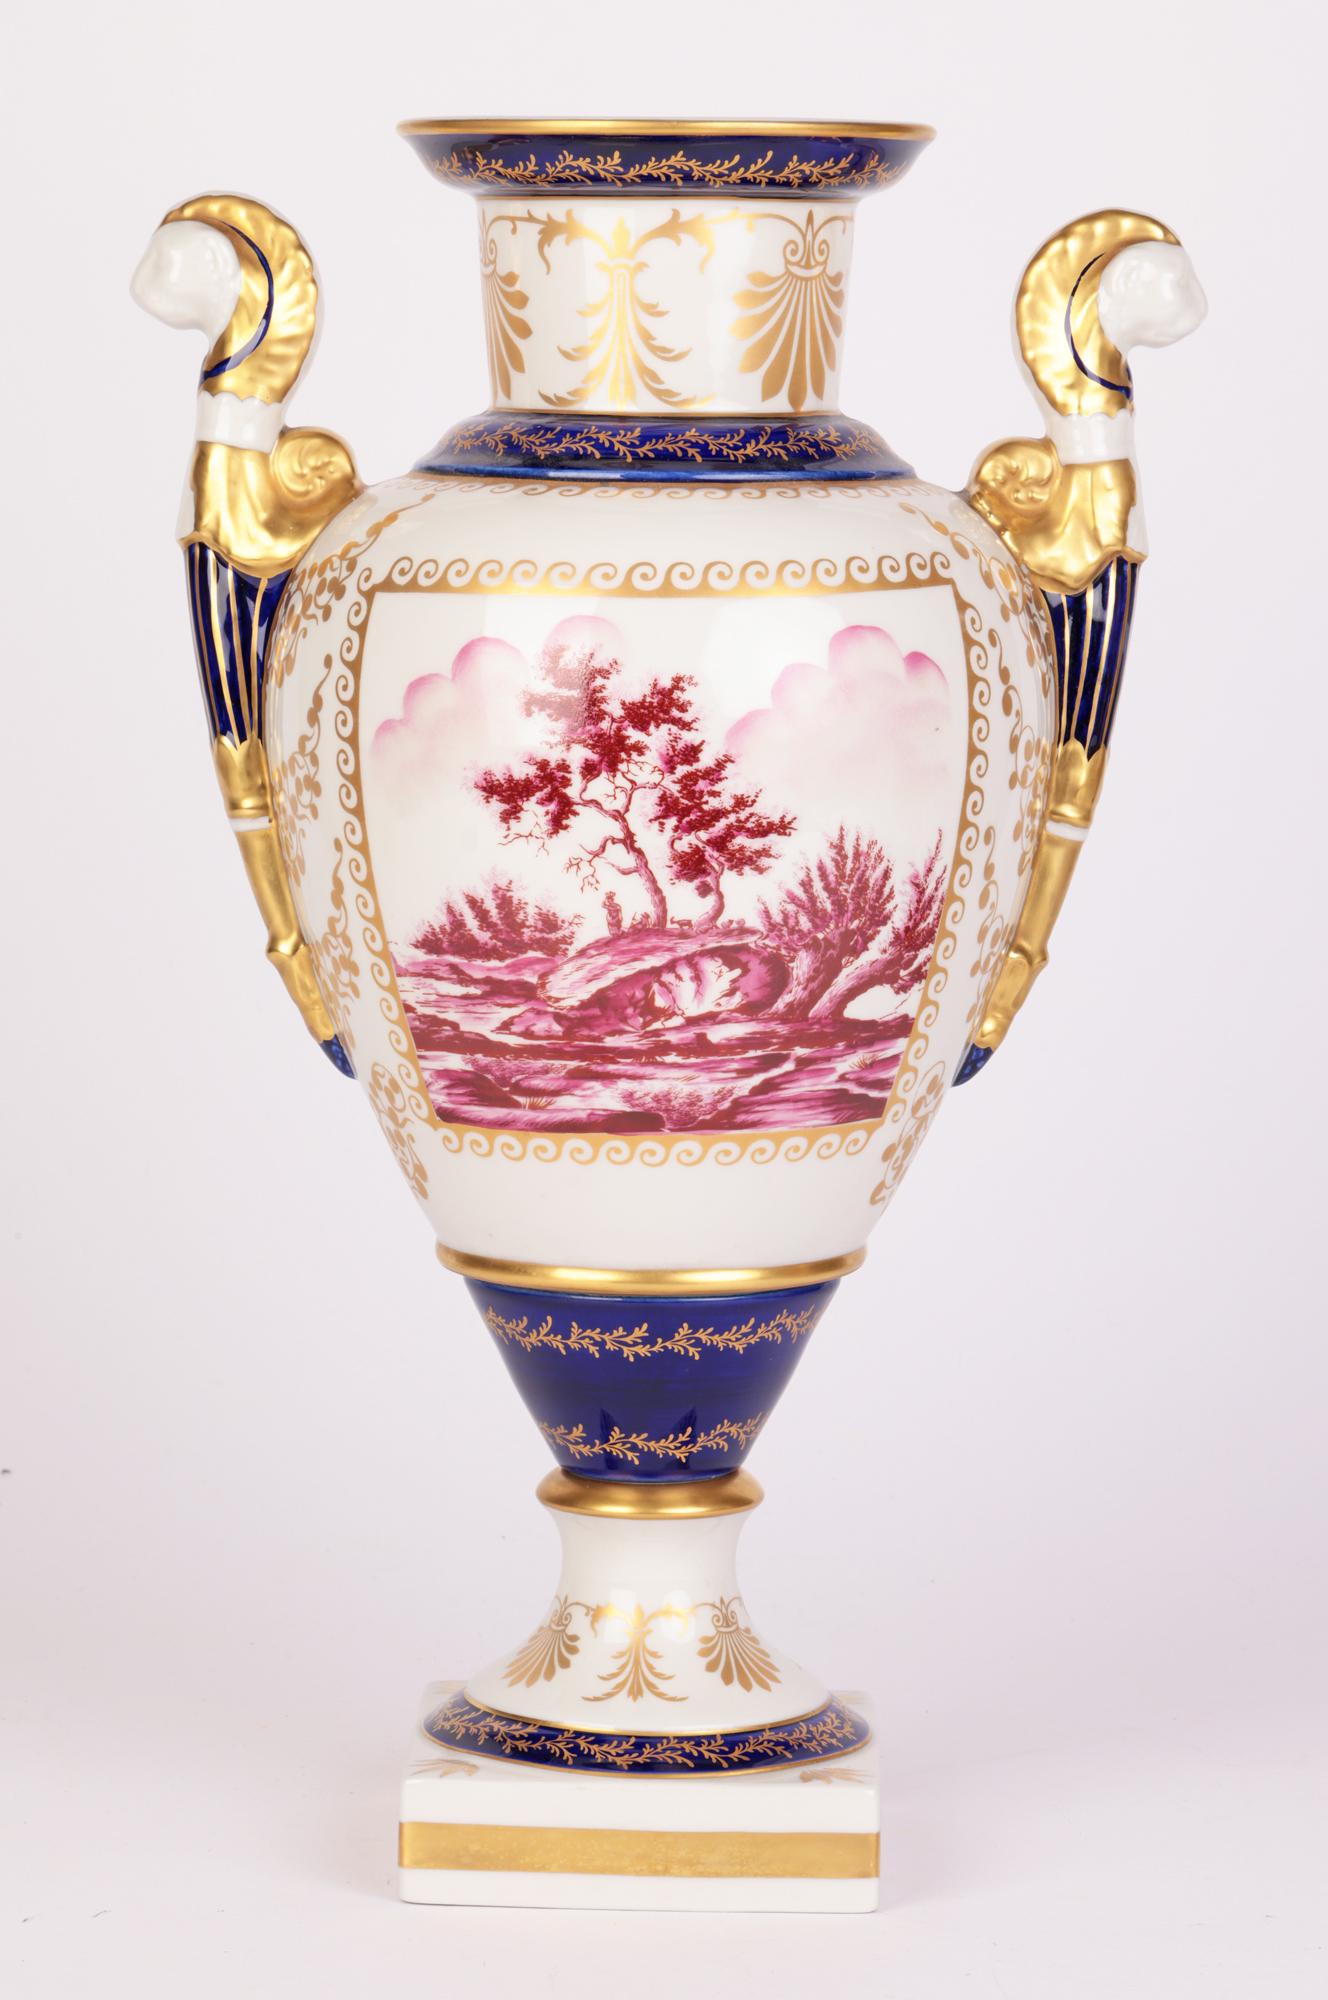 Mangani Italian Porcelain Hand Decorated Twin Handled Vase In Good Condition For Sale In Bishop's Stortford, Hertfordshire